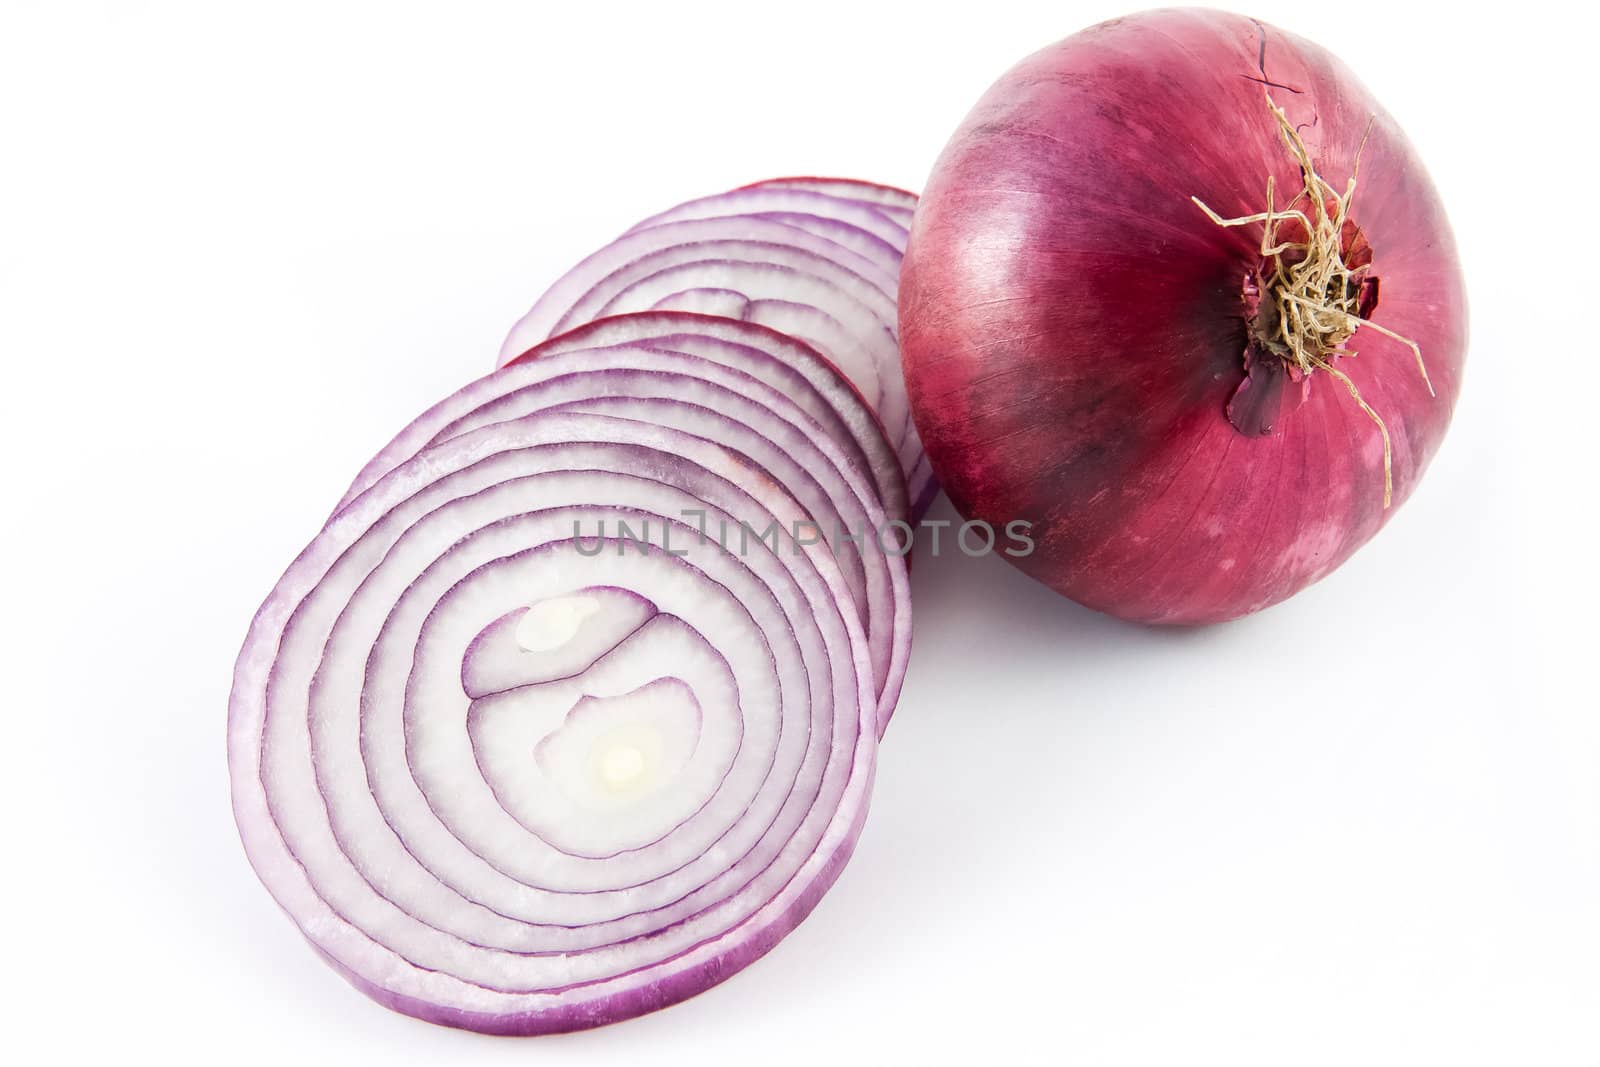 Red onion with slices by Stootsy